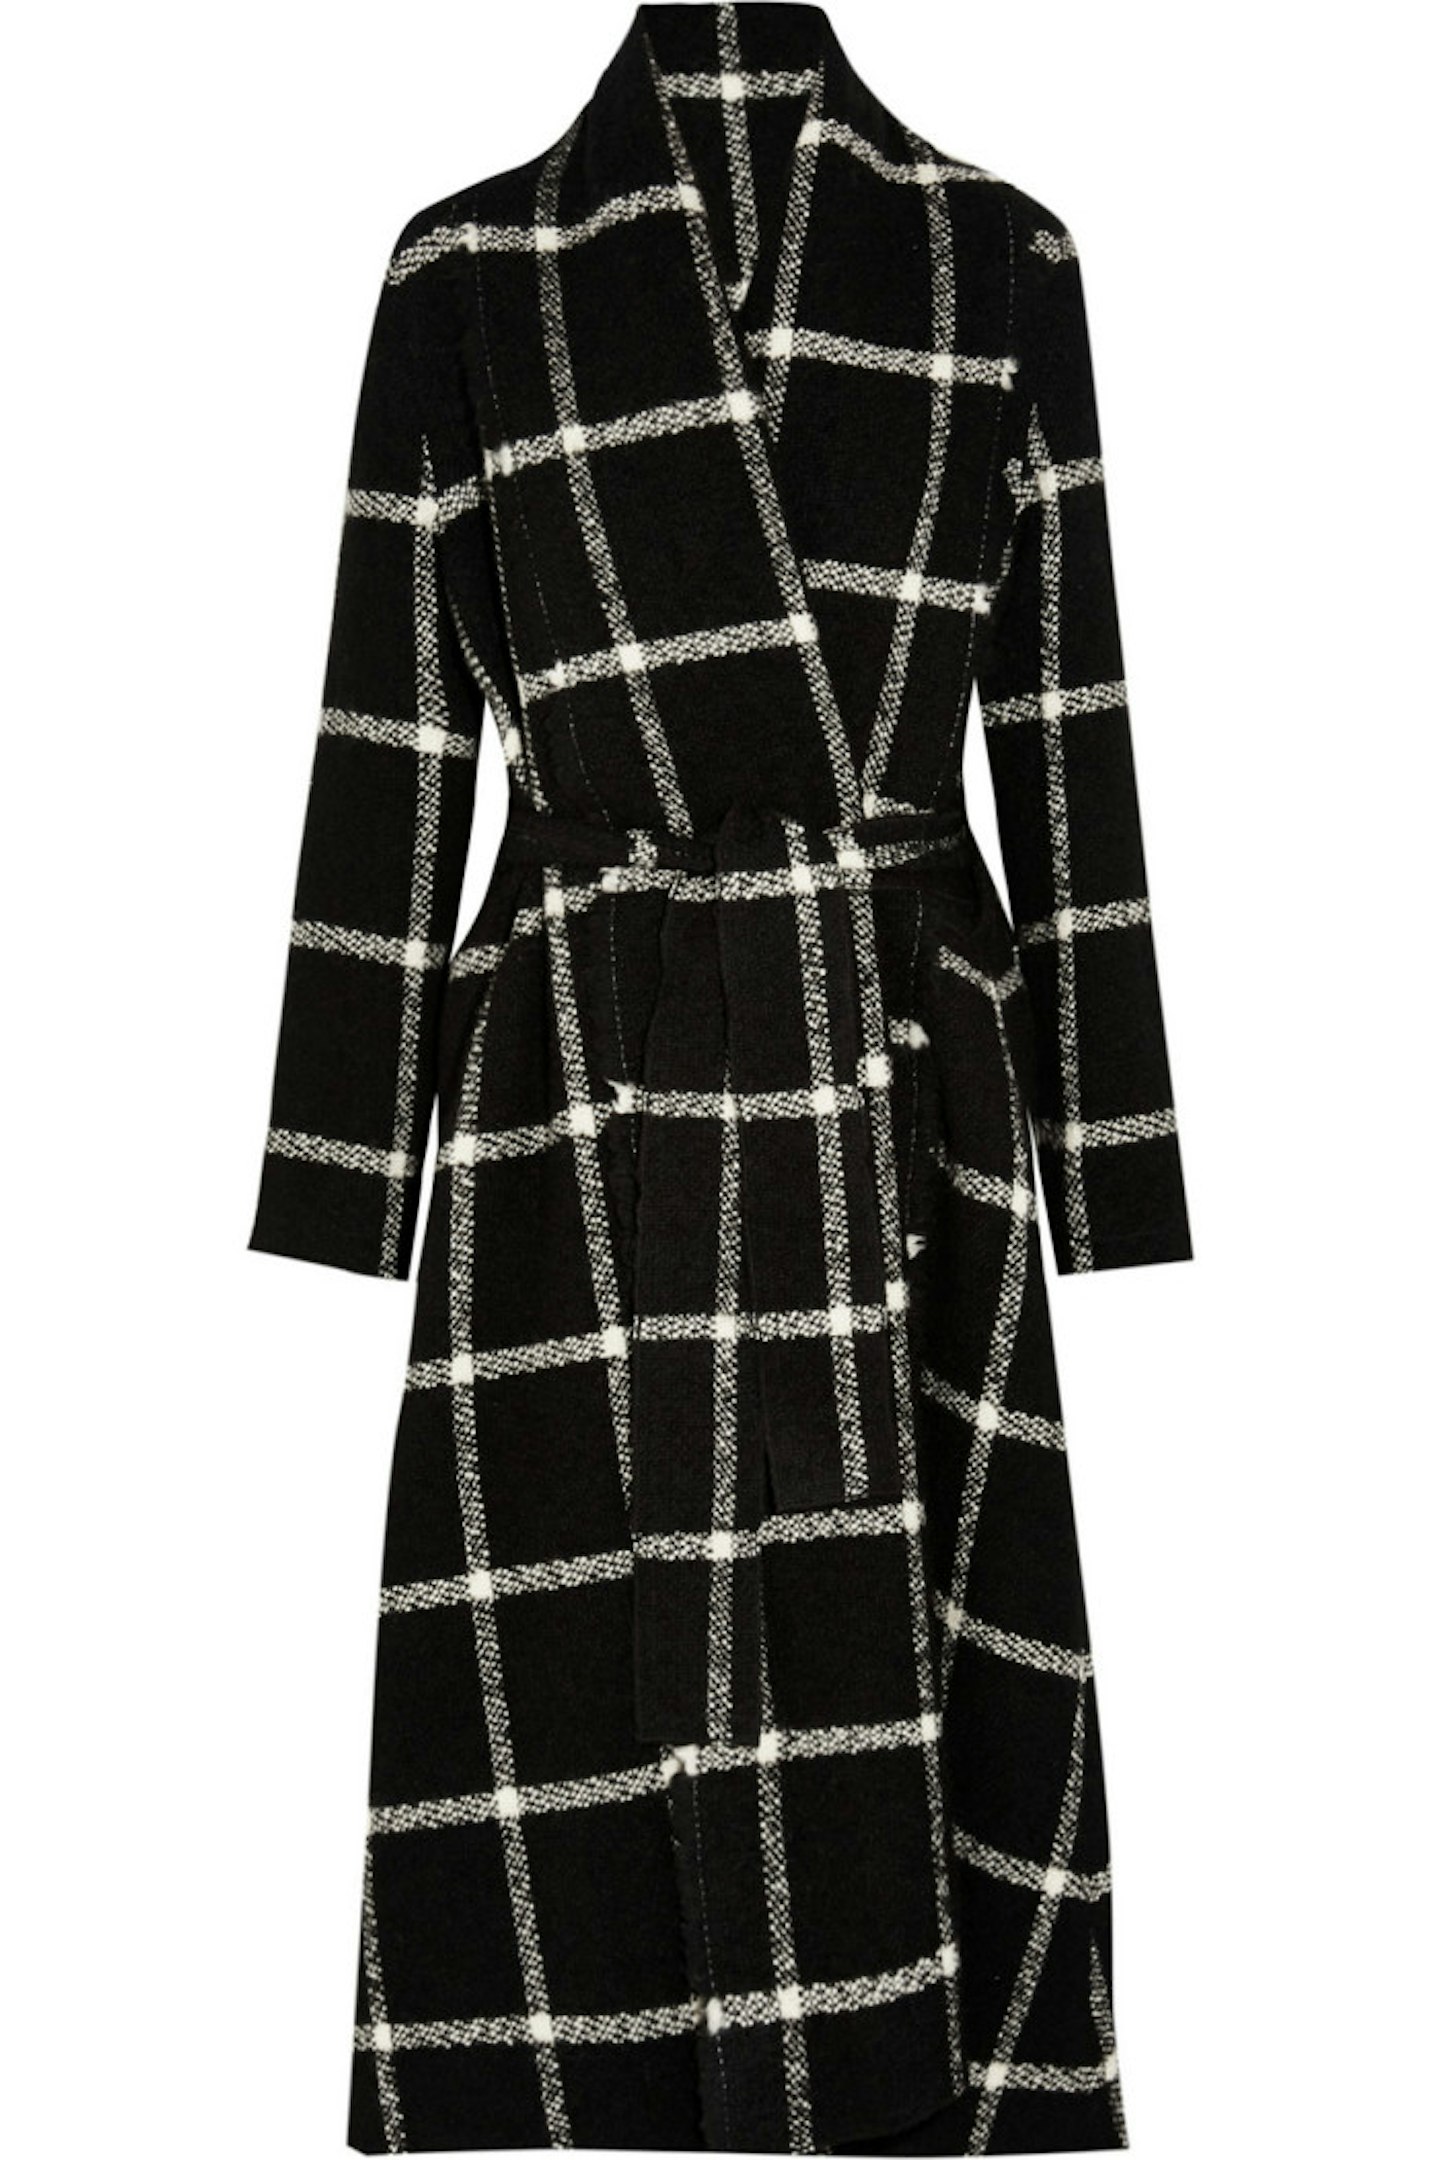 For a real royal robe look - go for this Lanvin coat. Black tights and biker boots will look perfect with it.